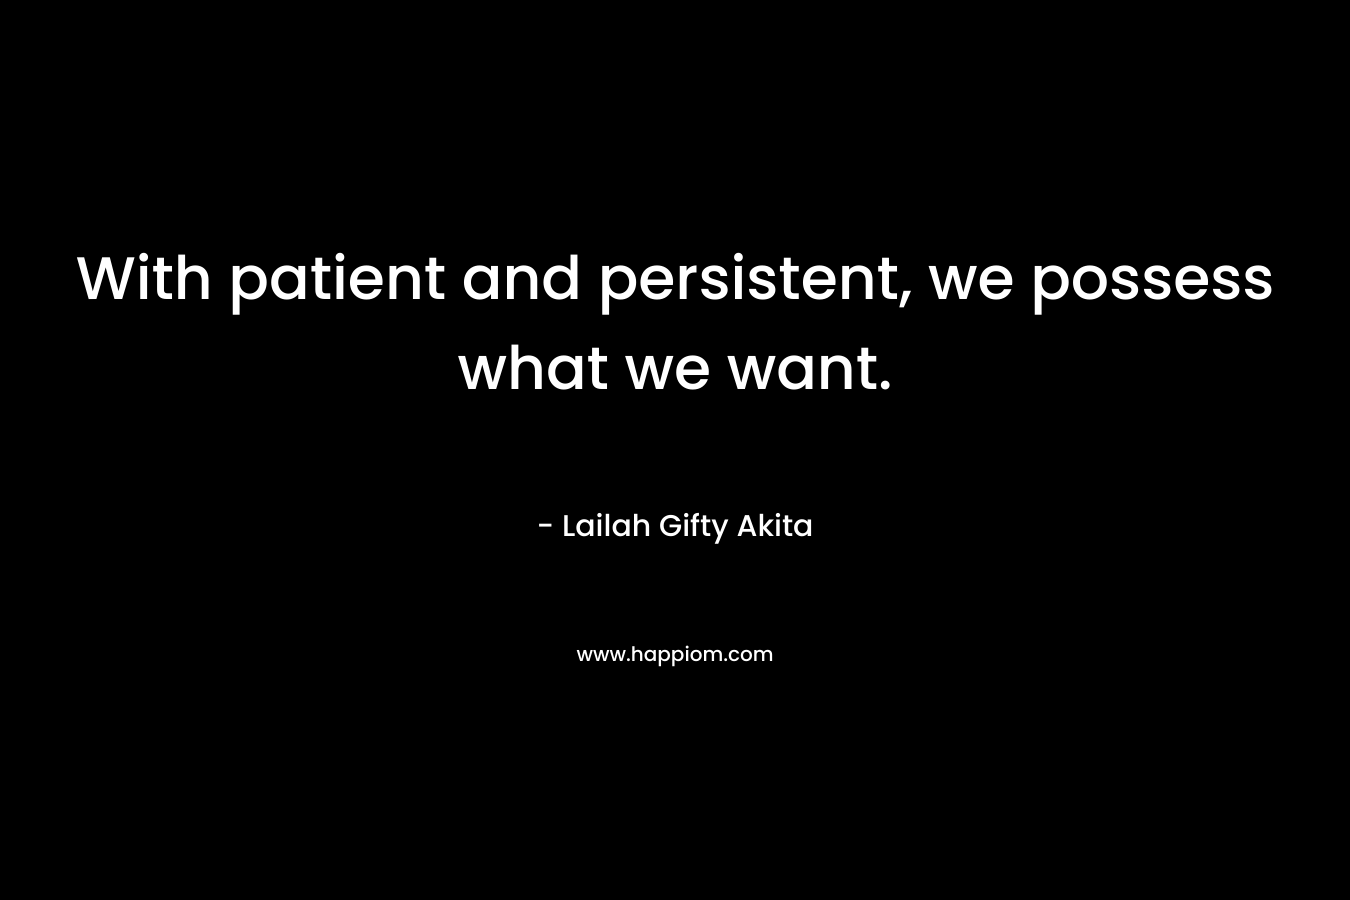 With patient and persistent, we possess what we want.